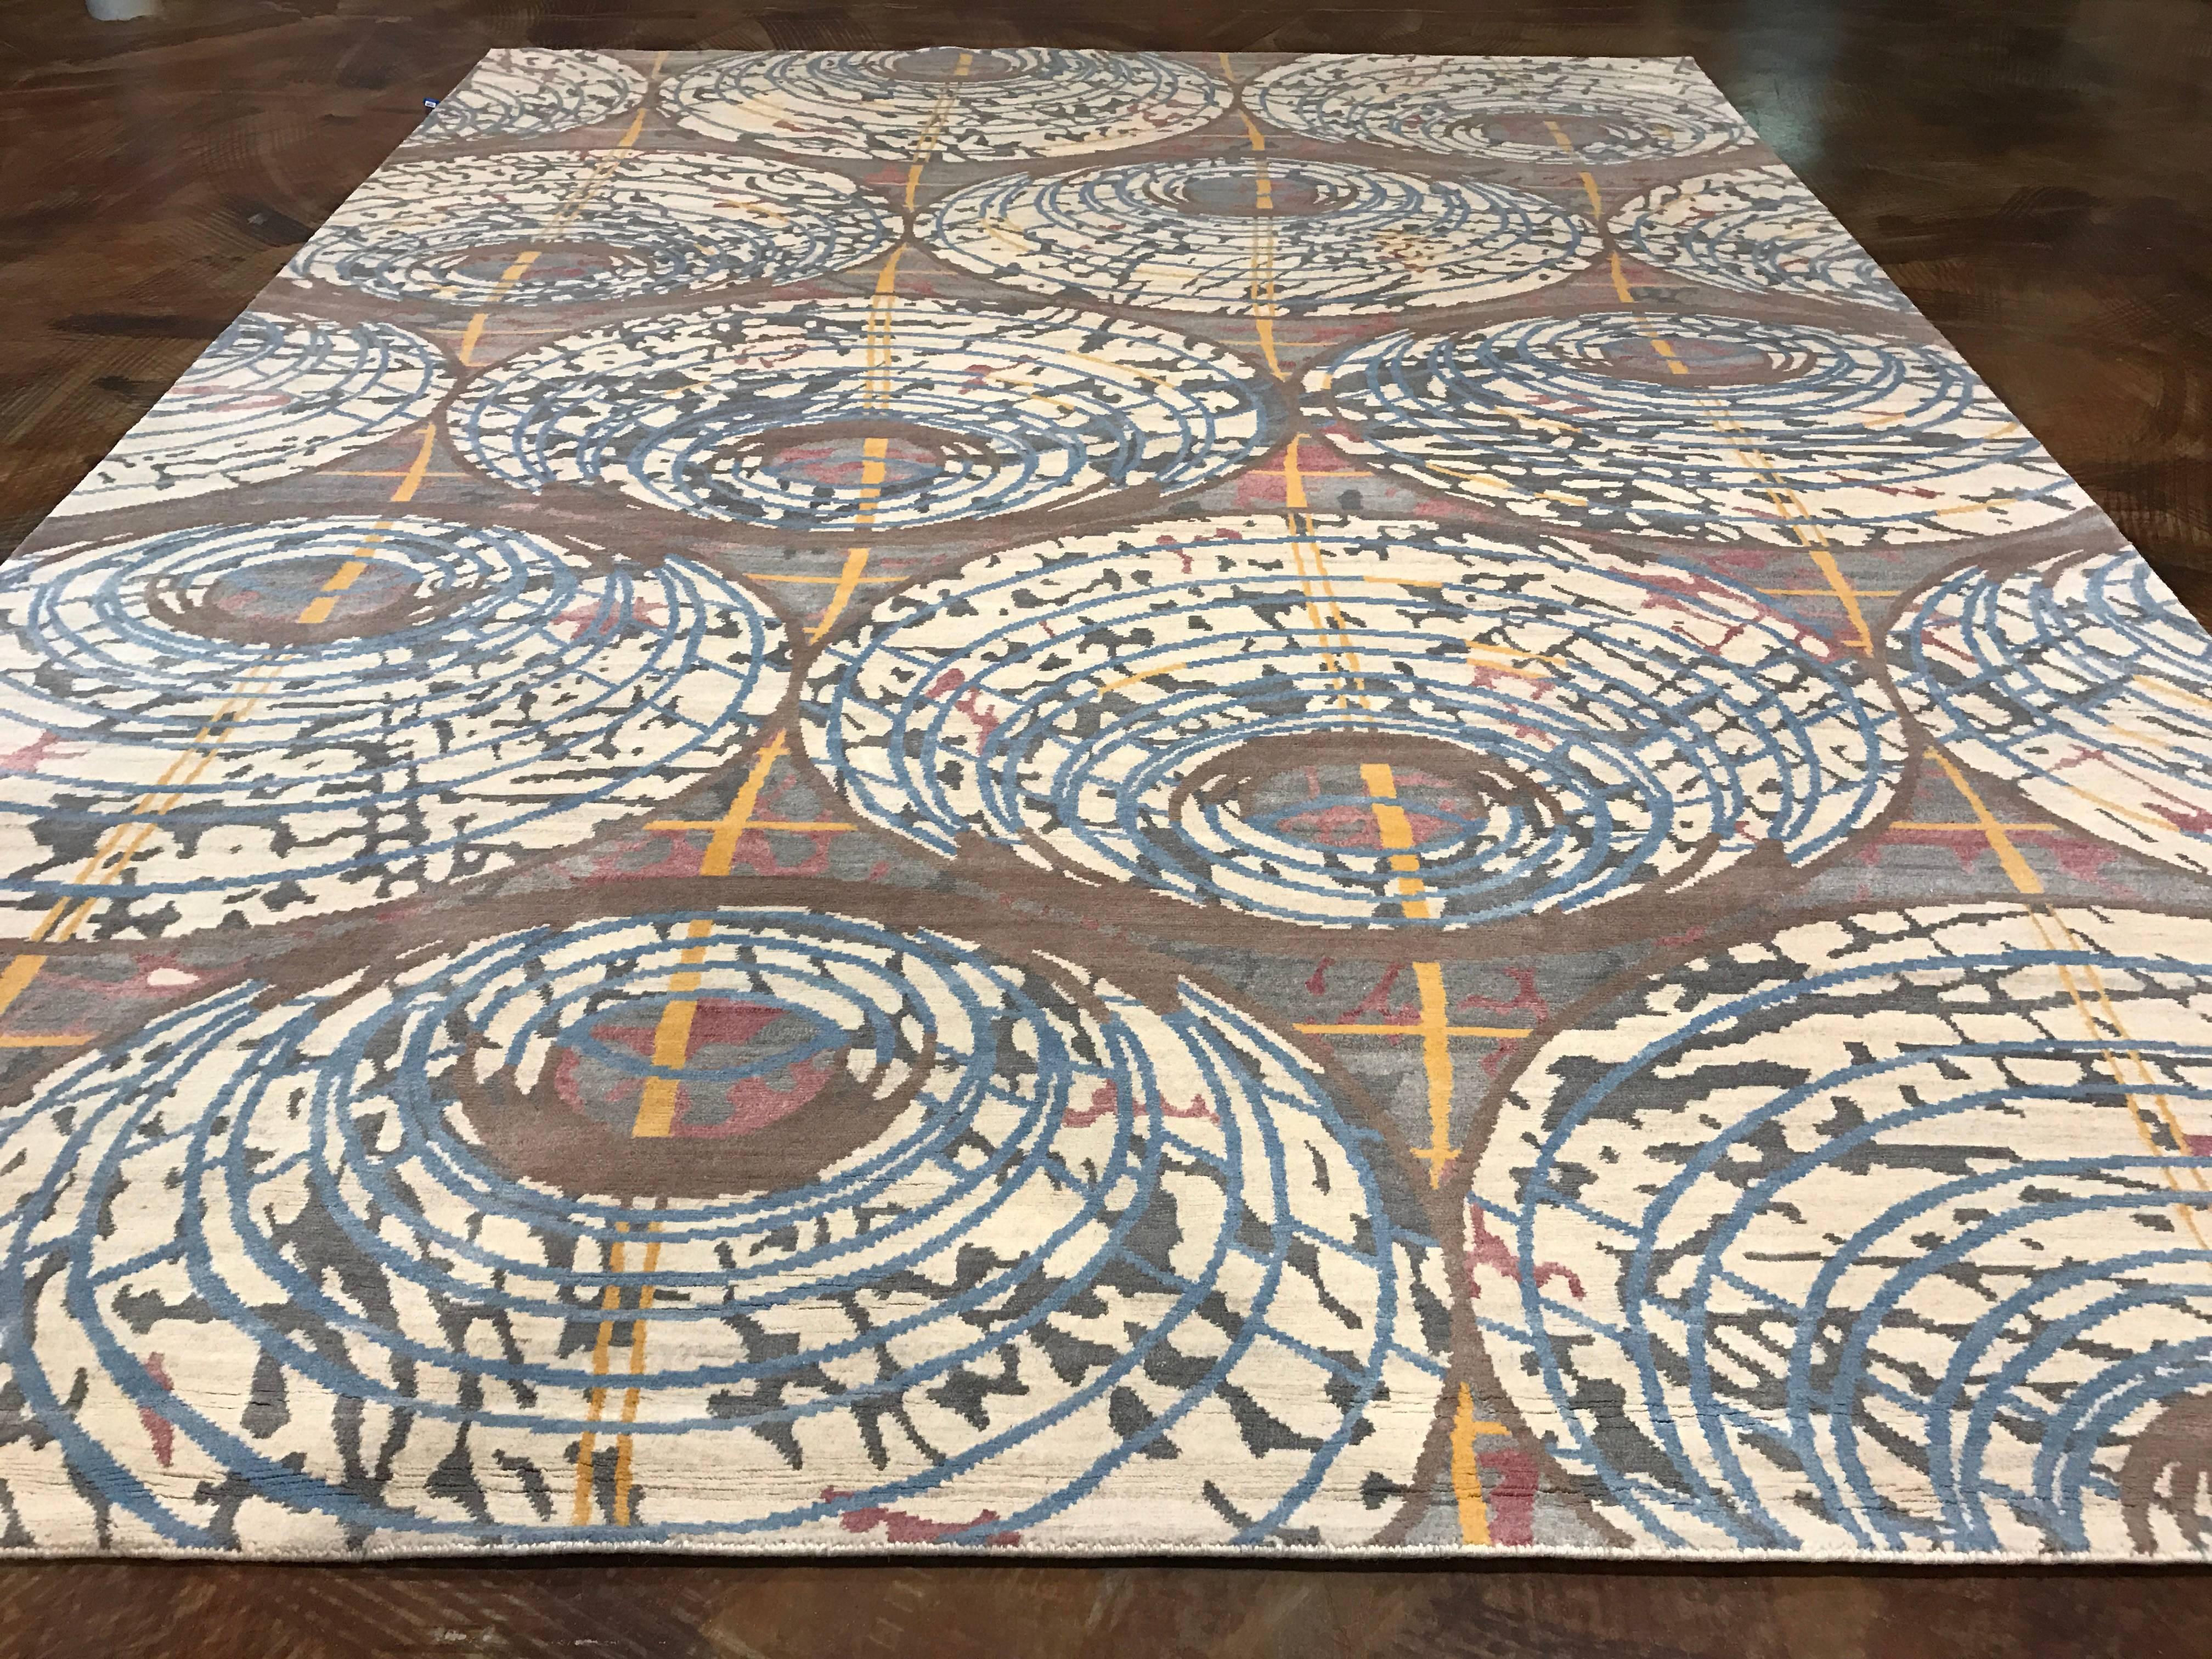 Modern Indo-Nepalese Rug Athena Collection In Excellent Condition For Sale In Katy, TX